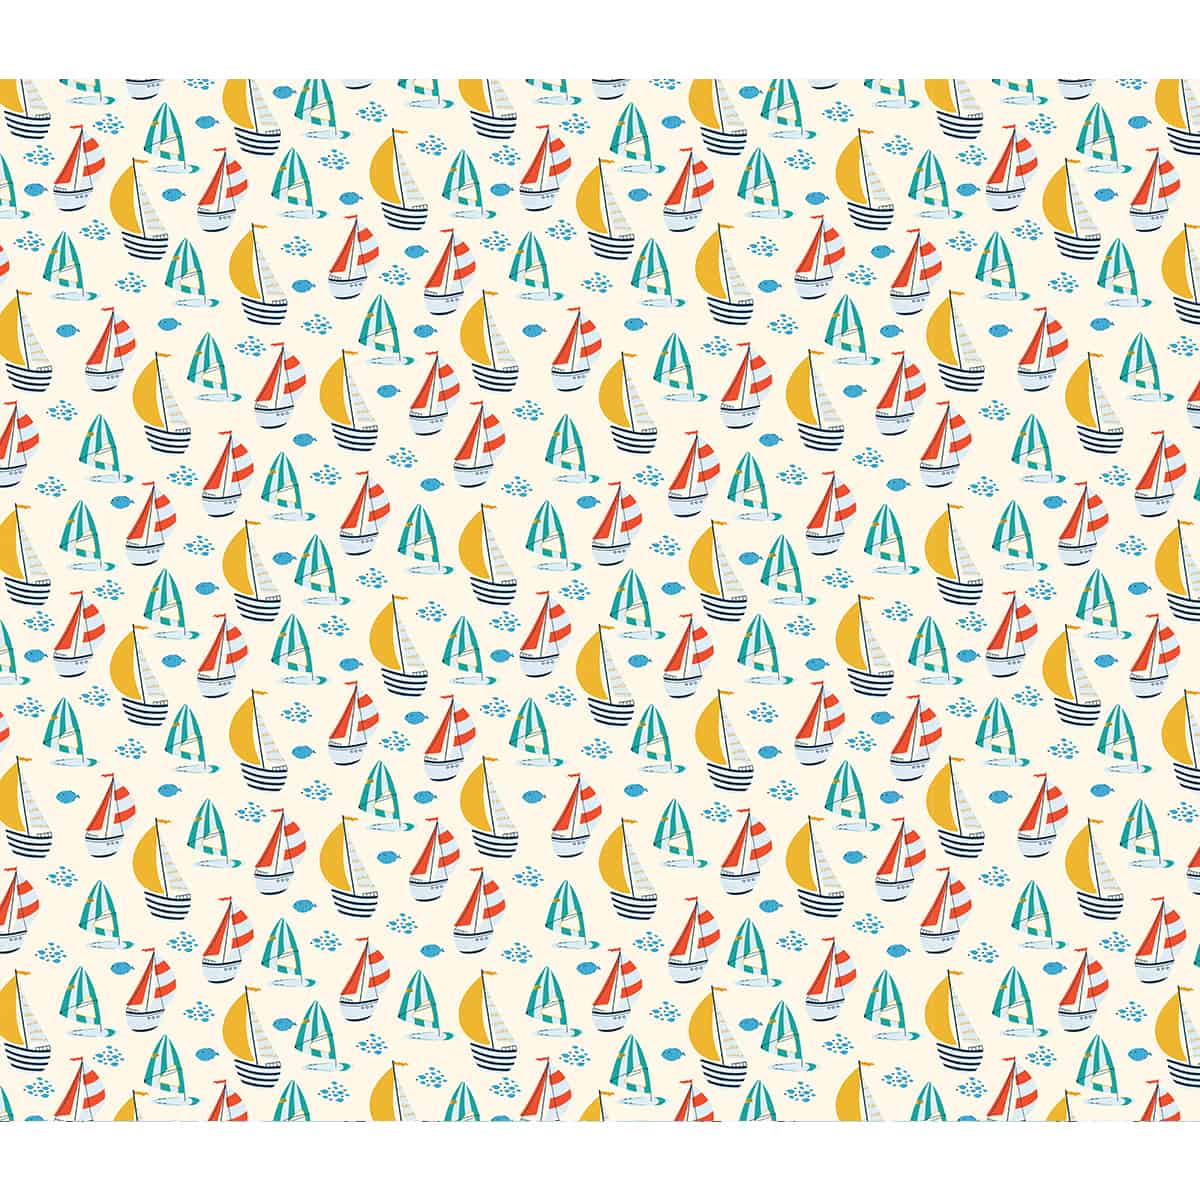 Nautical Wallpaper with Colorful Sailing Boats, Repeat Pattern, Customised